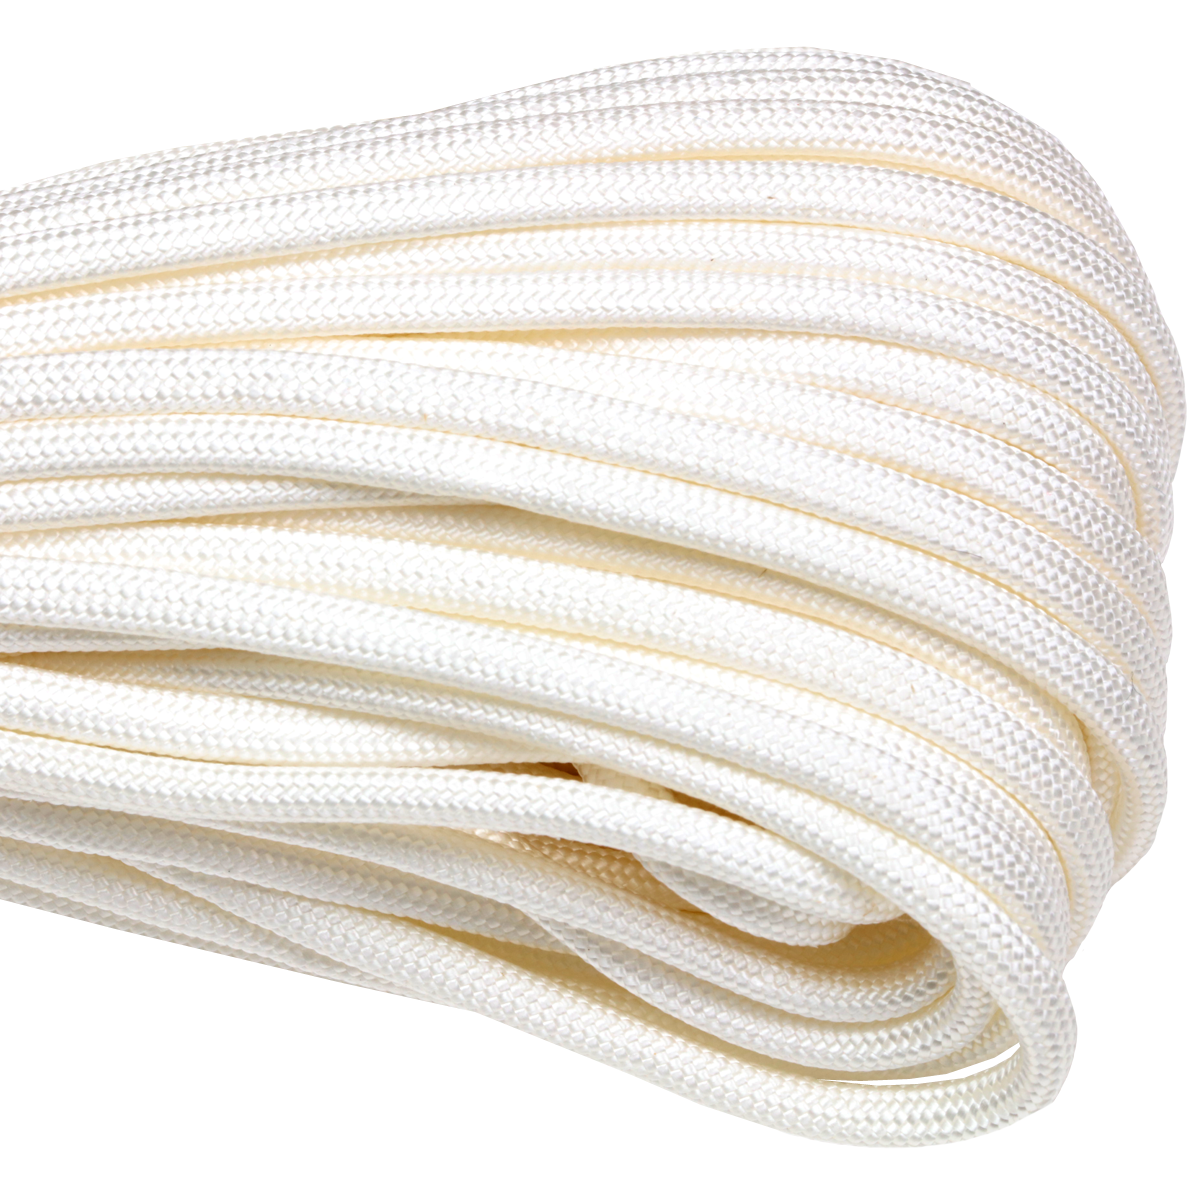 Dyna X Cord UHMWPE Rope  Buy High Strength Low Stretch UHMWPE